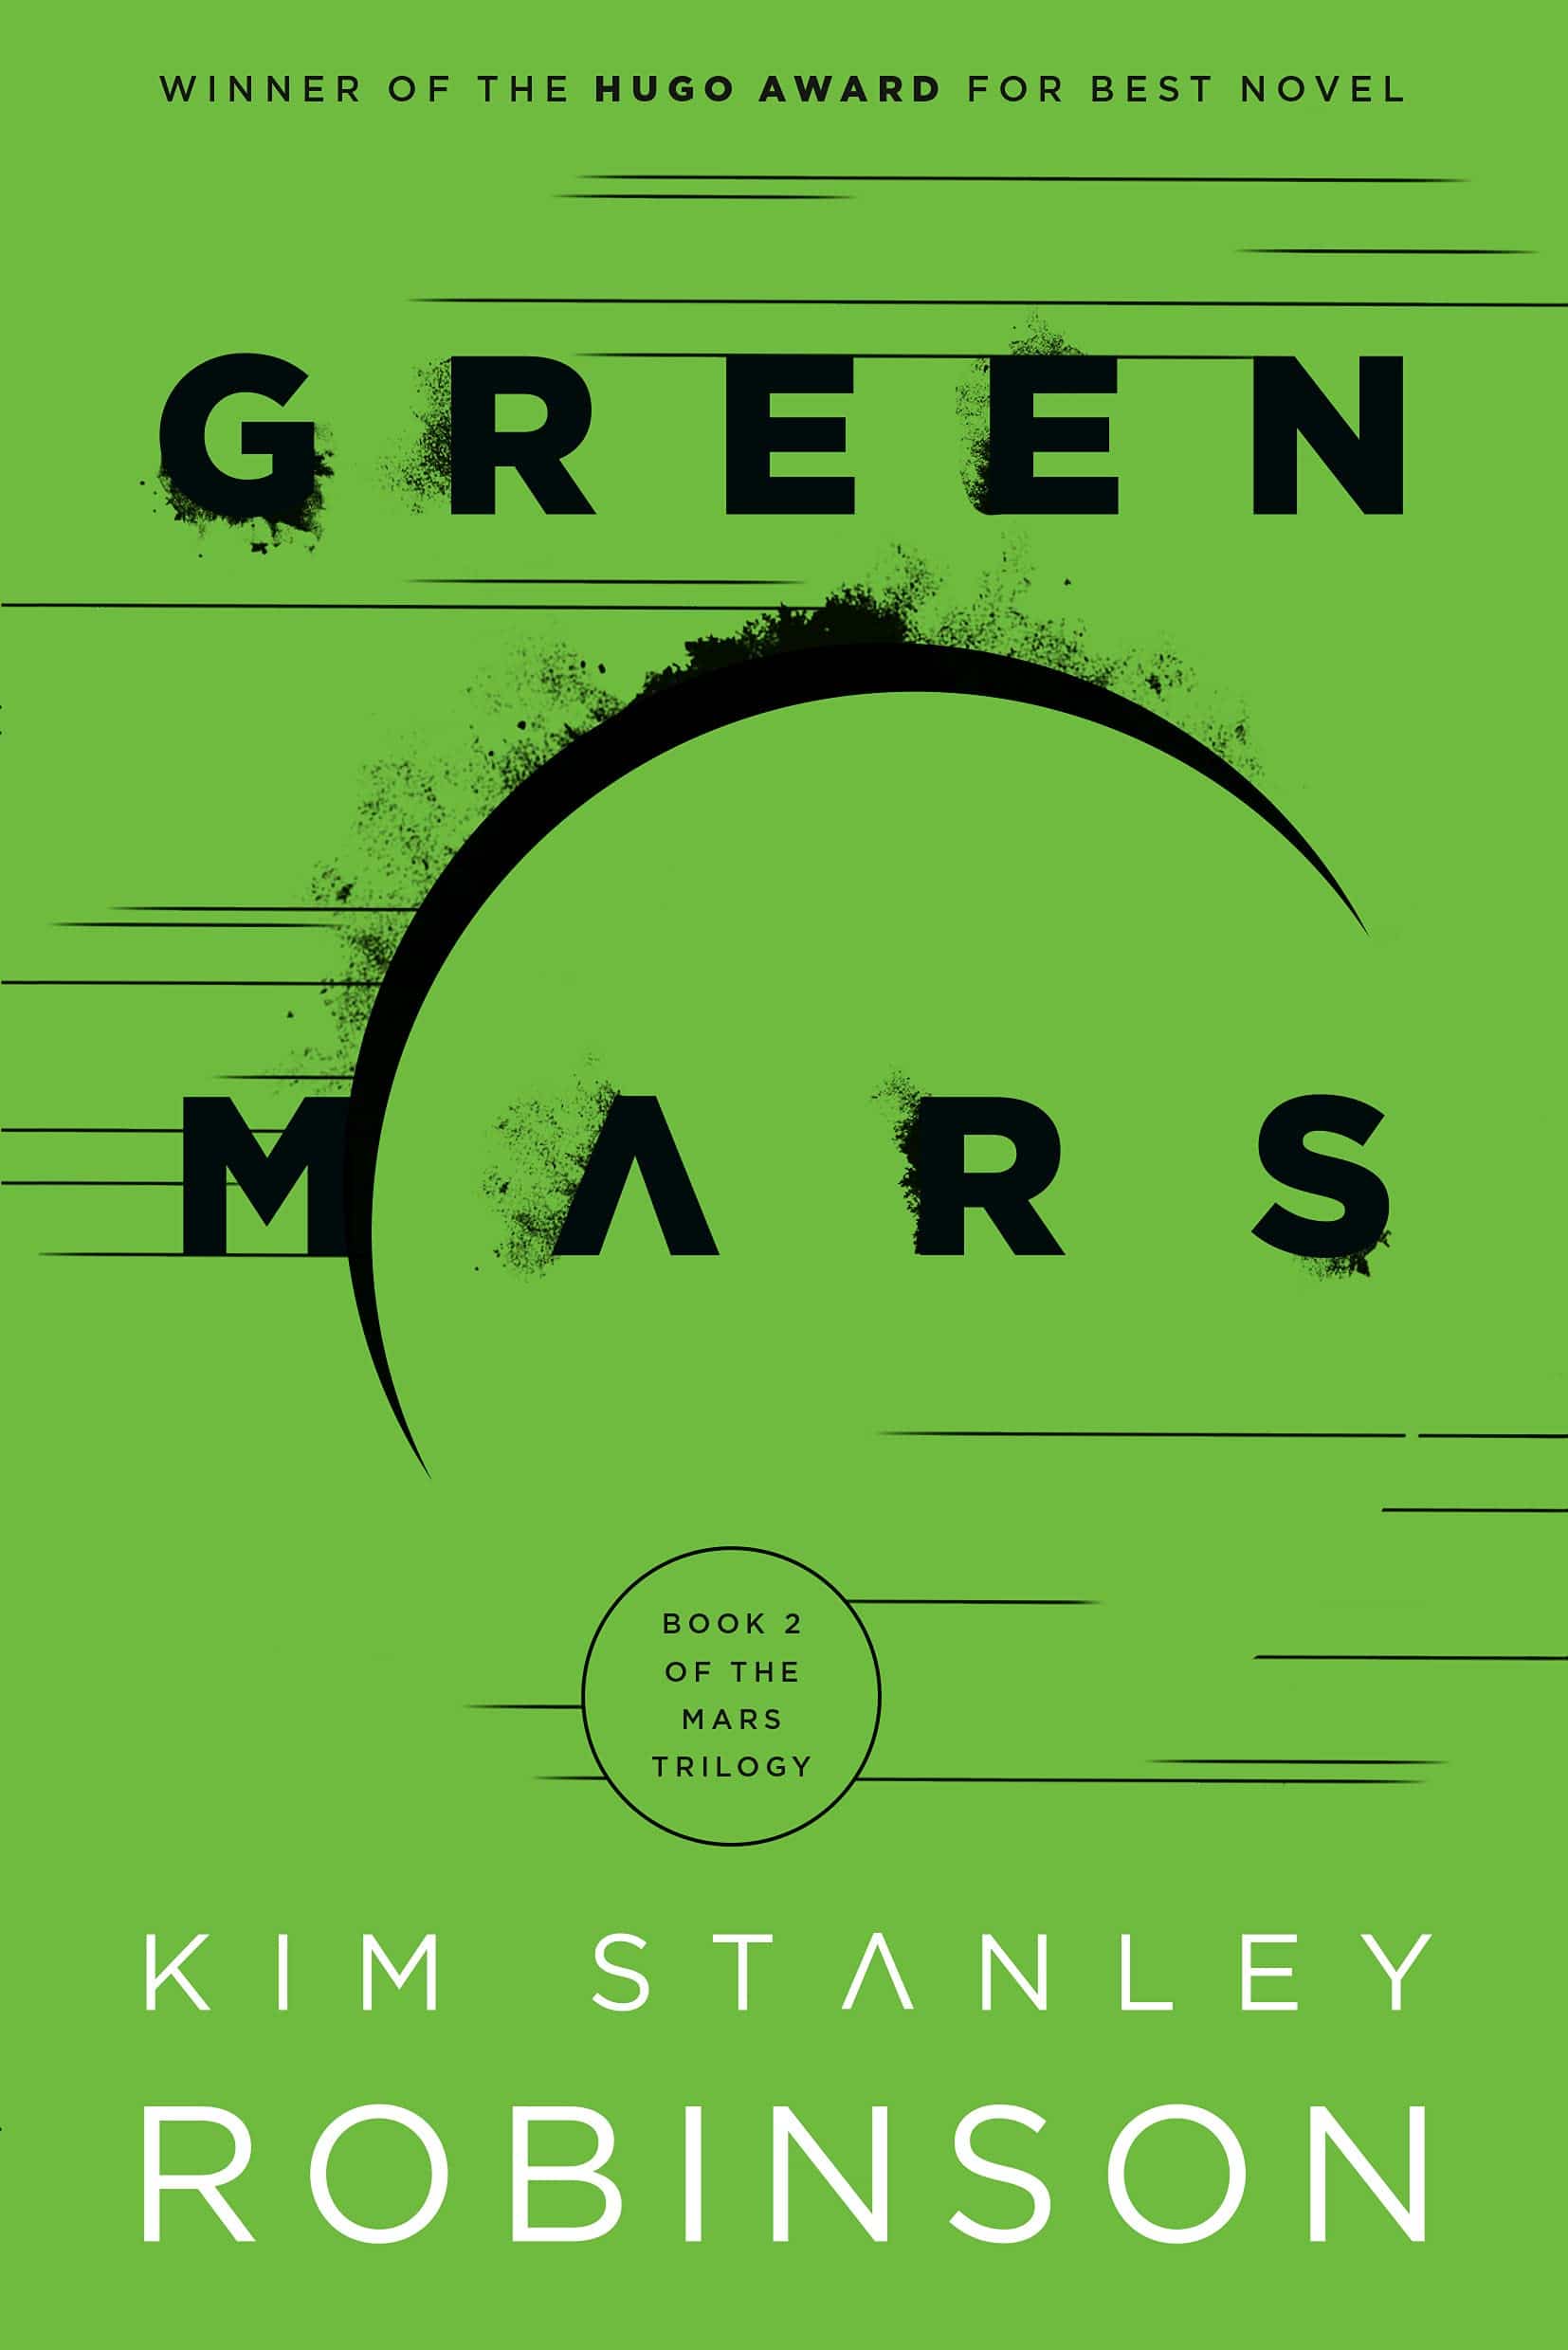 The cover of Green Mars